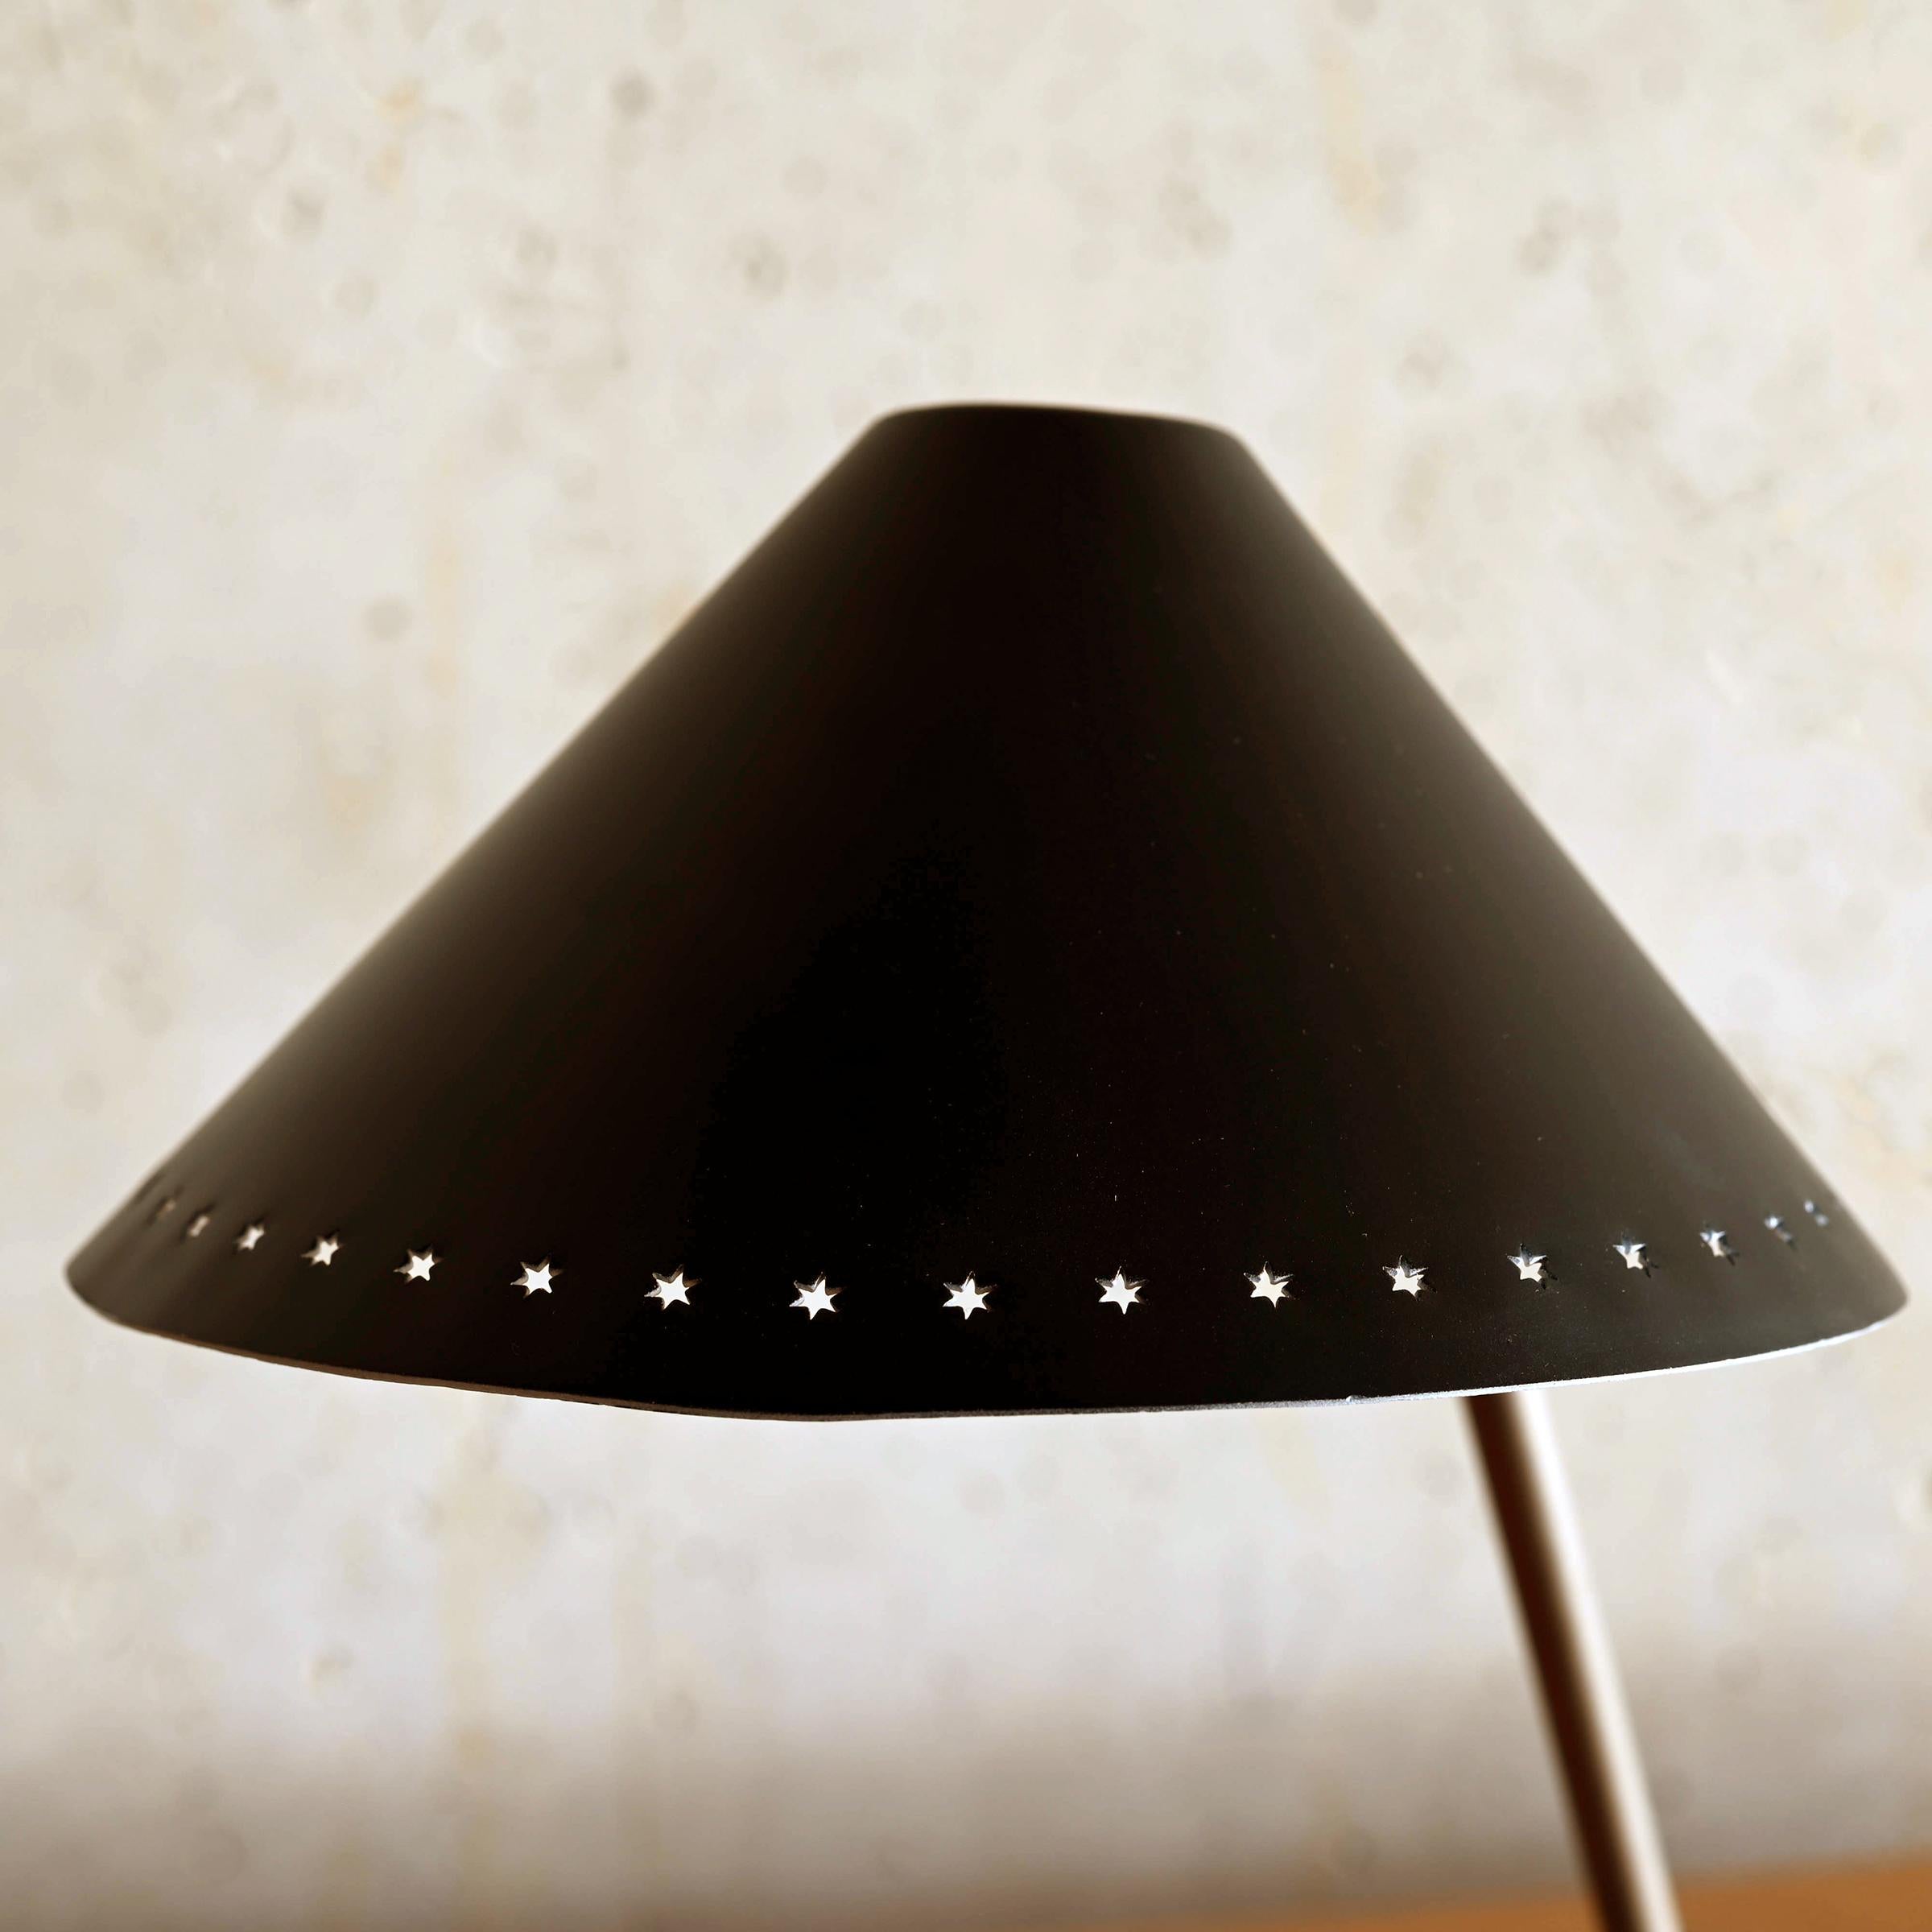 Steel Pinocchio Lamp with black shade by H. Busquet for Hala Zeist, Netherlands